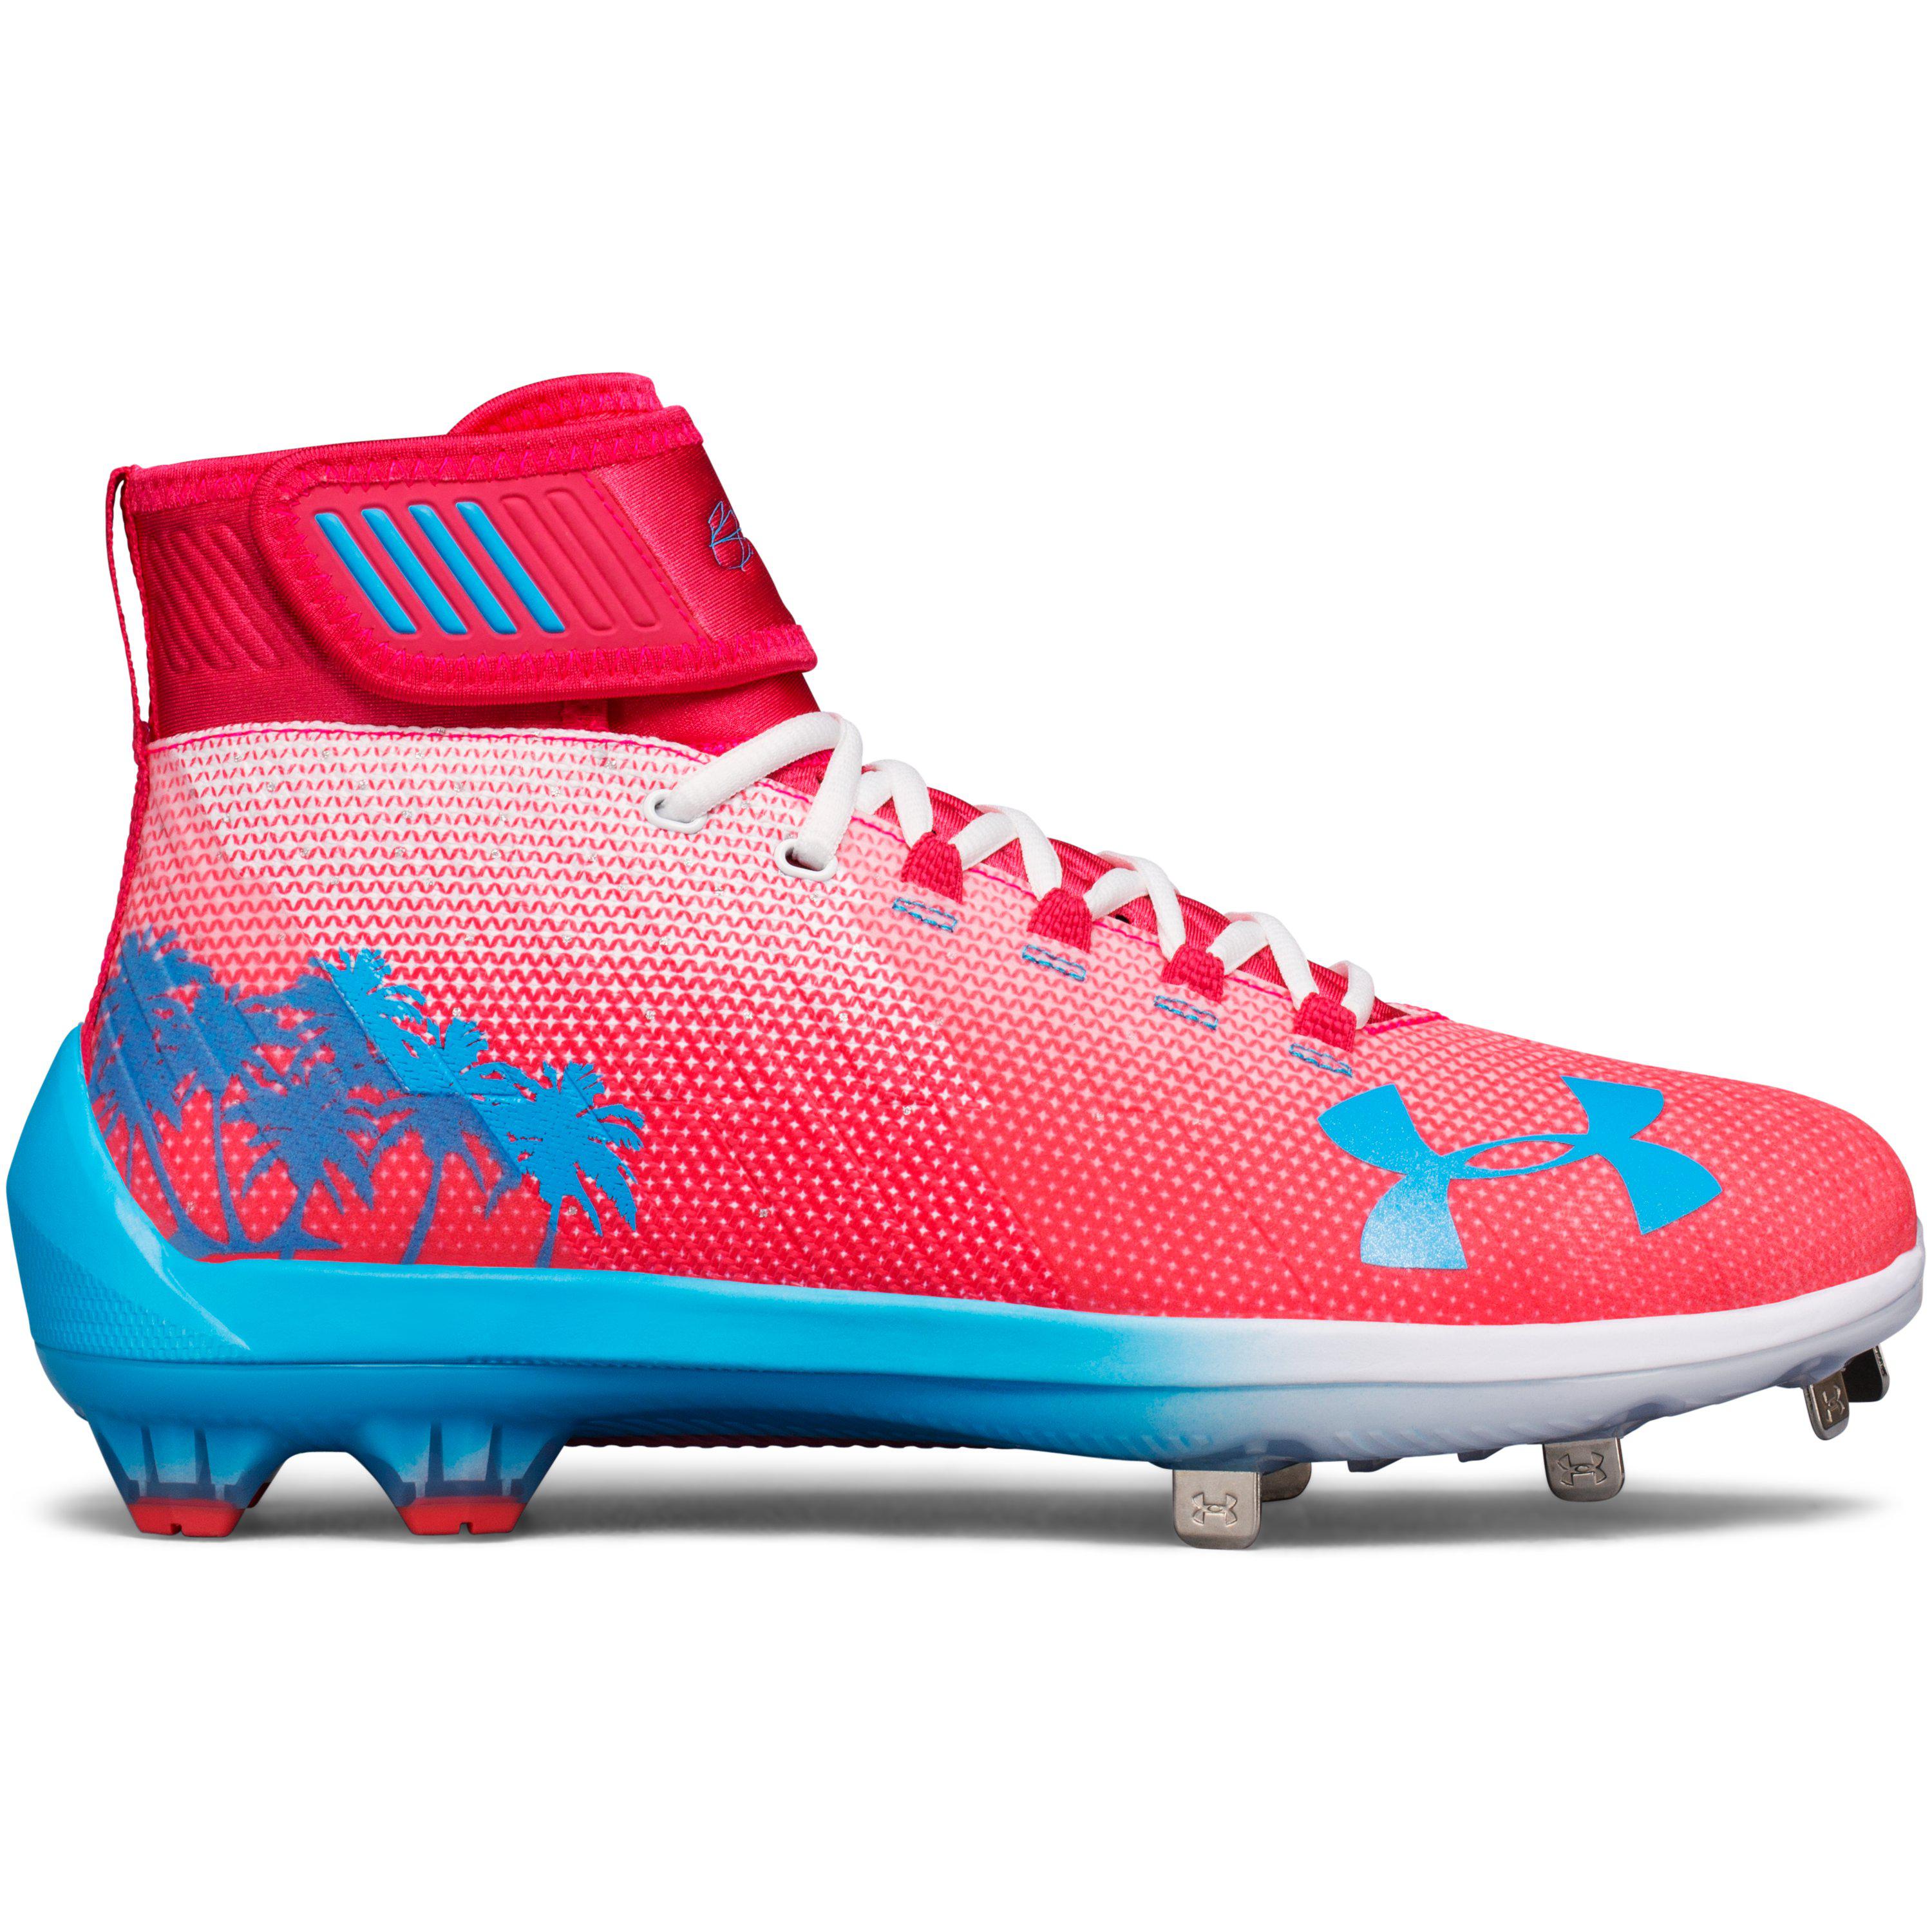 Under Armour Men's Ua Harper Two Mid St – Limited Edition Baseball Cleats  *ships 9/16/2017* for Men | Lyst